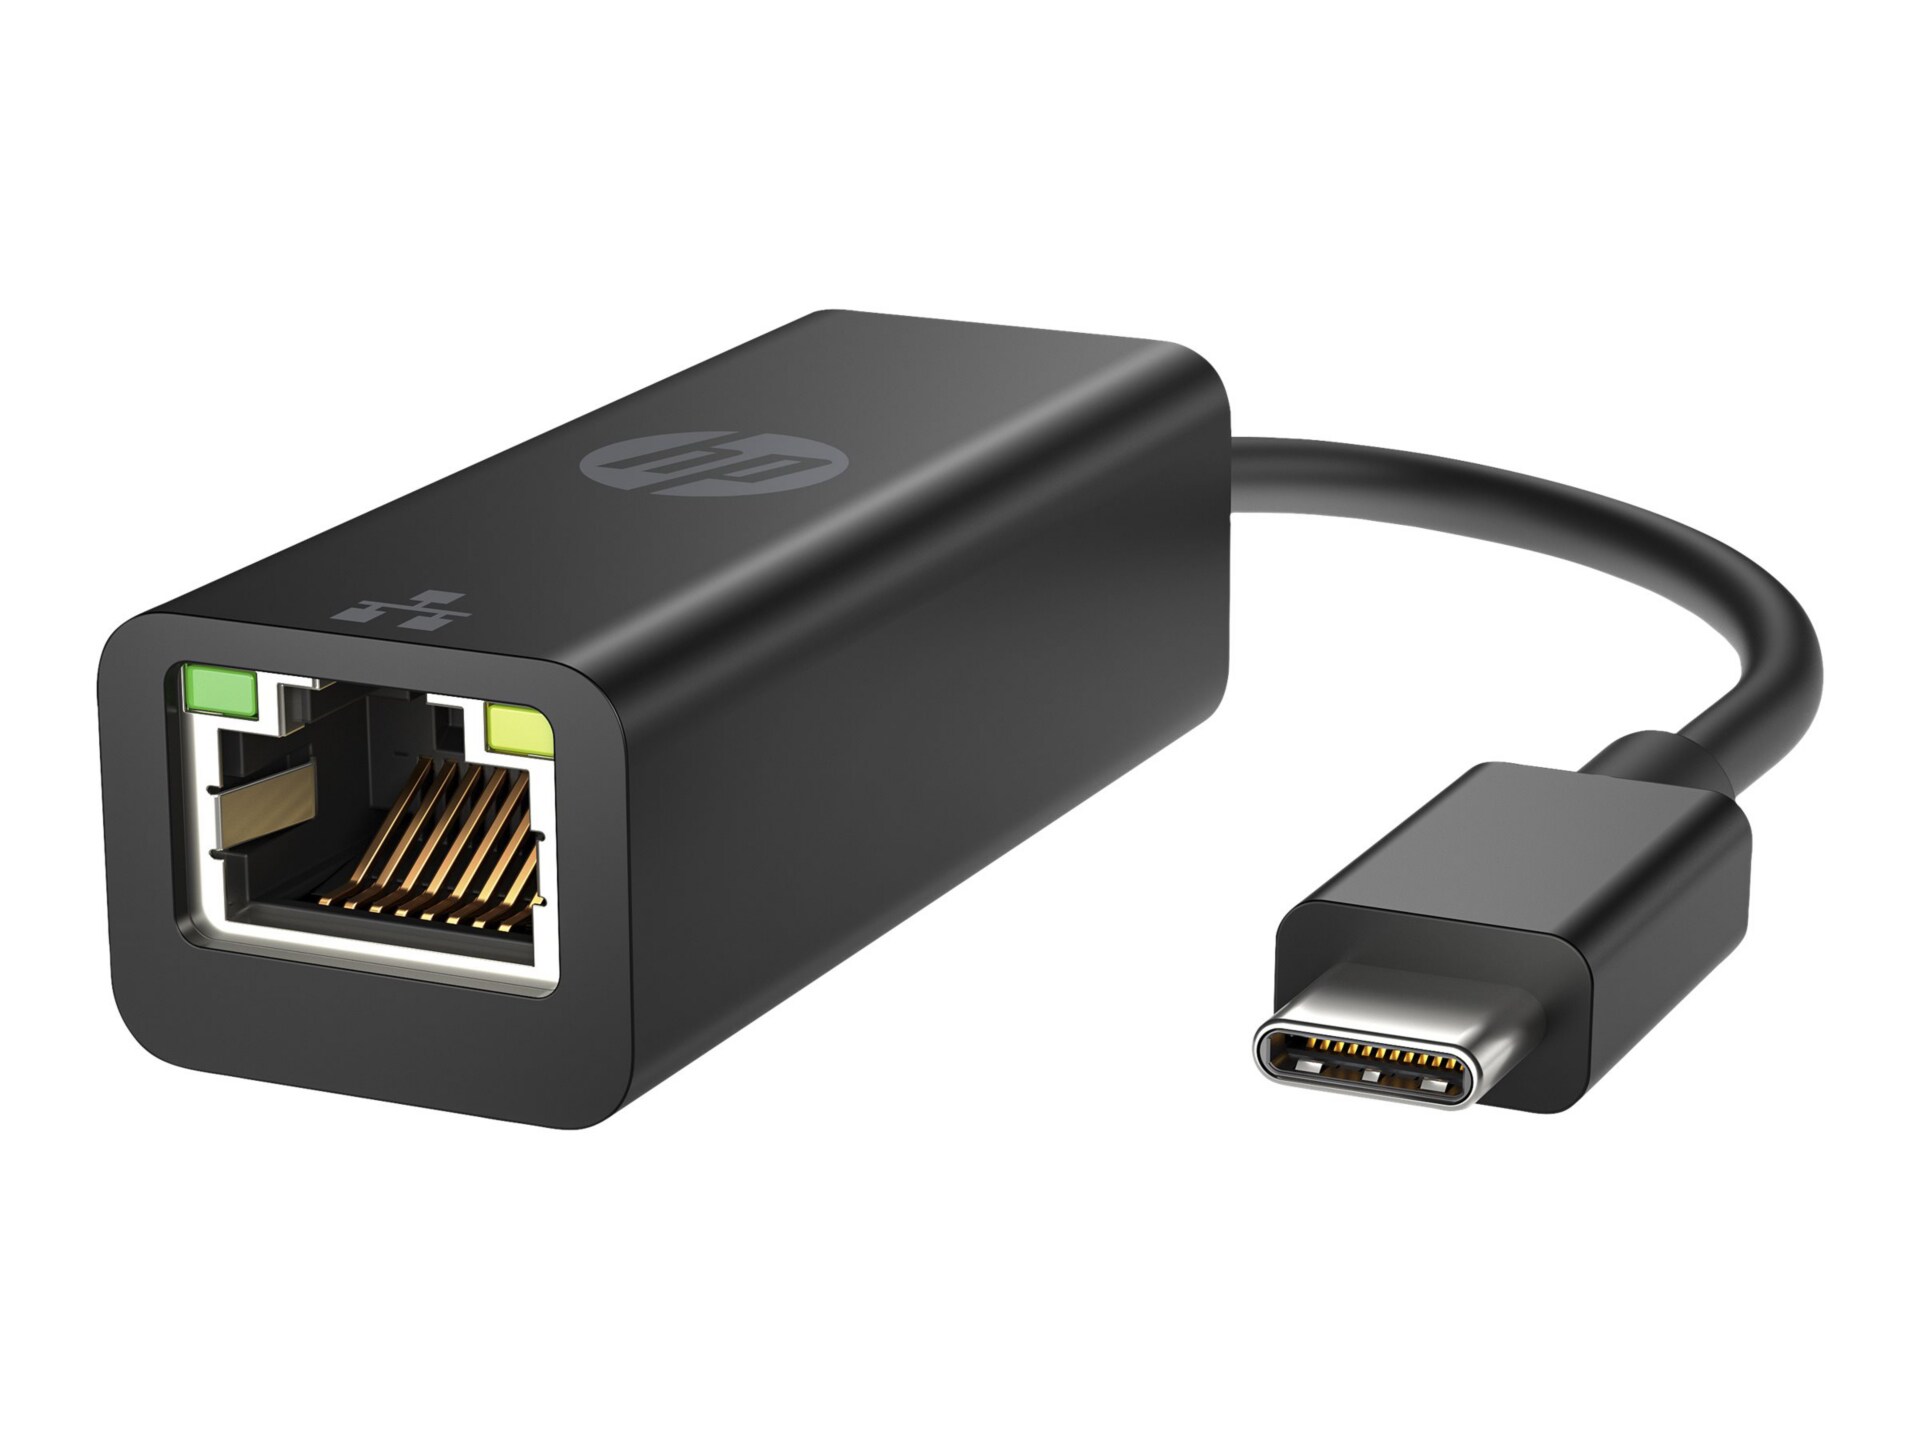 HP USB-C to RJ45 Adapter G2 (4Z527AA)